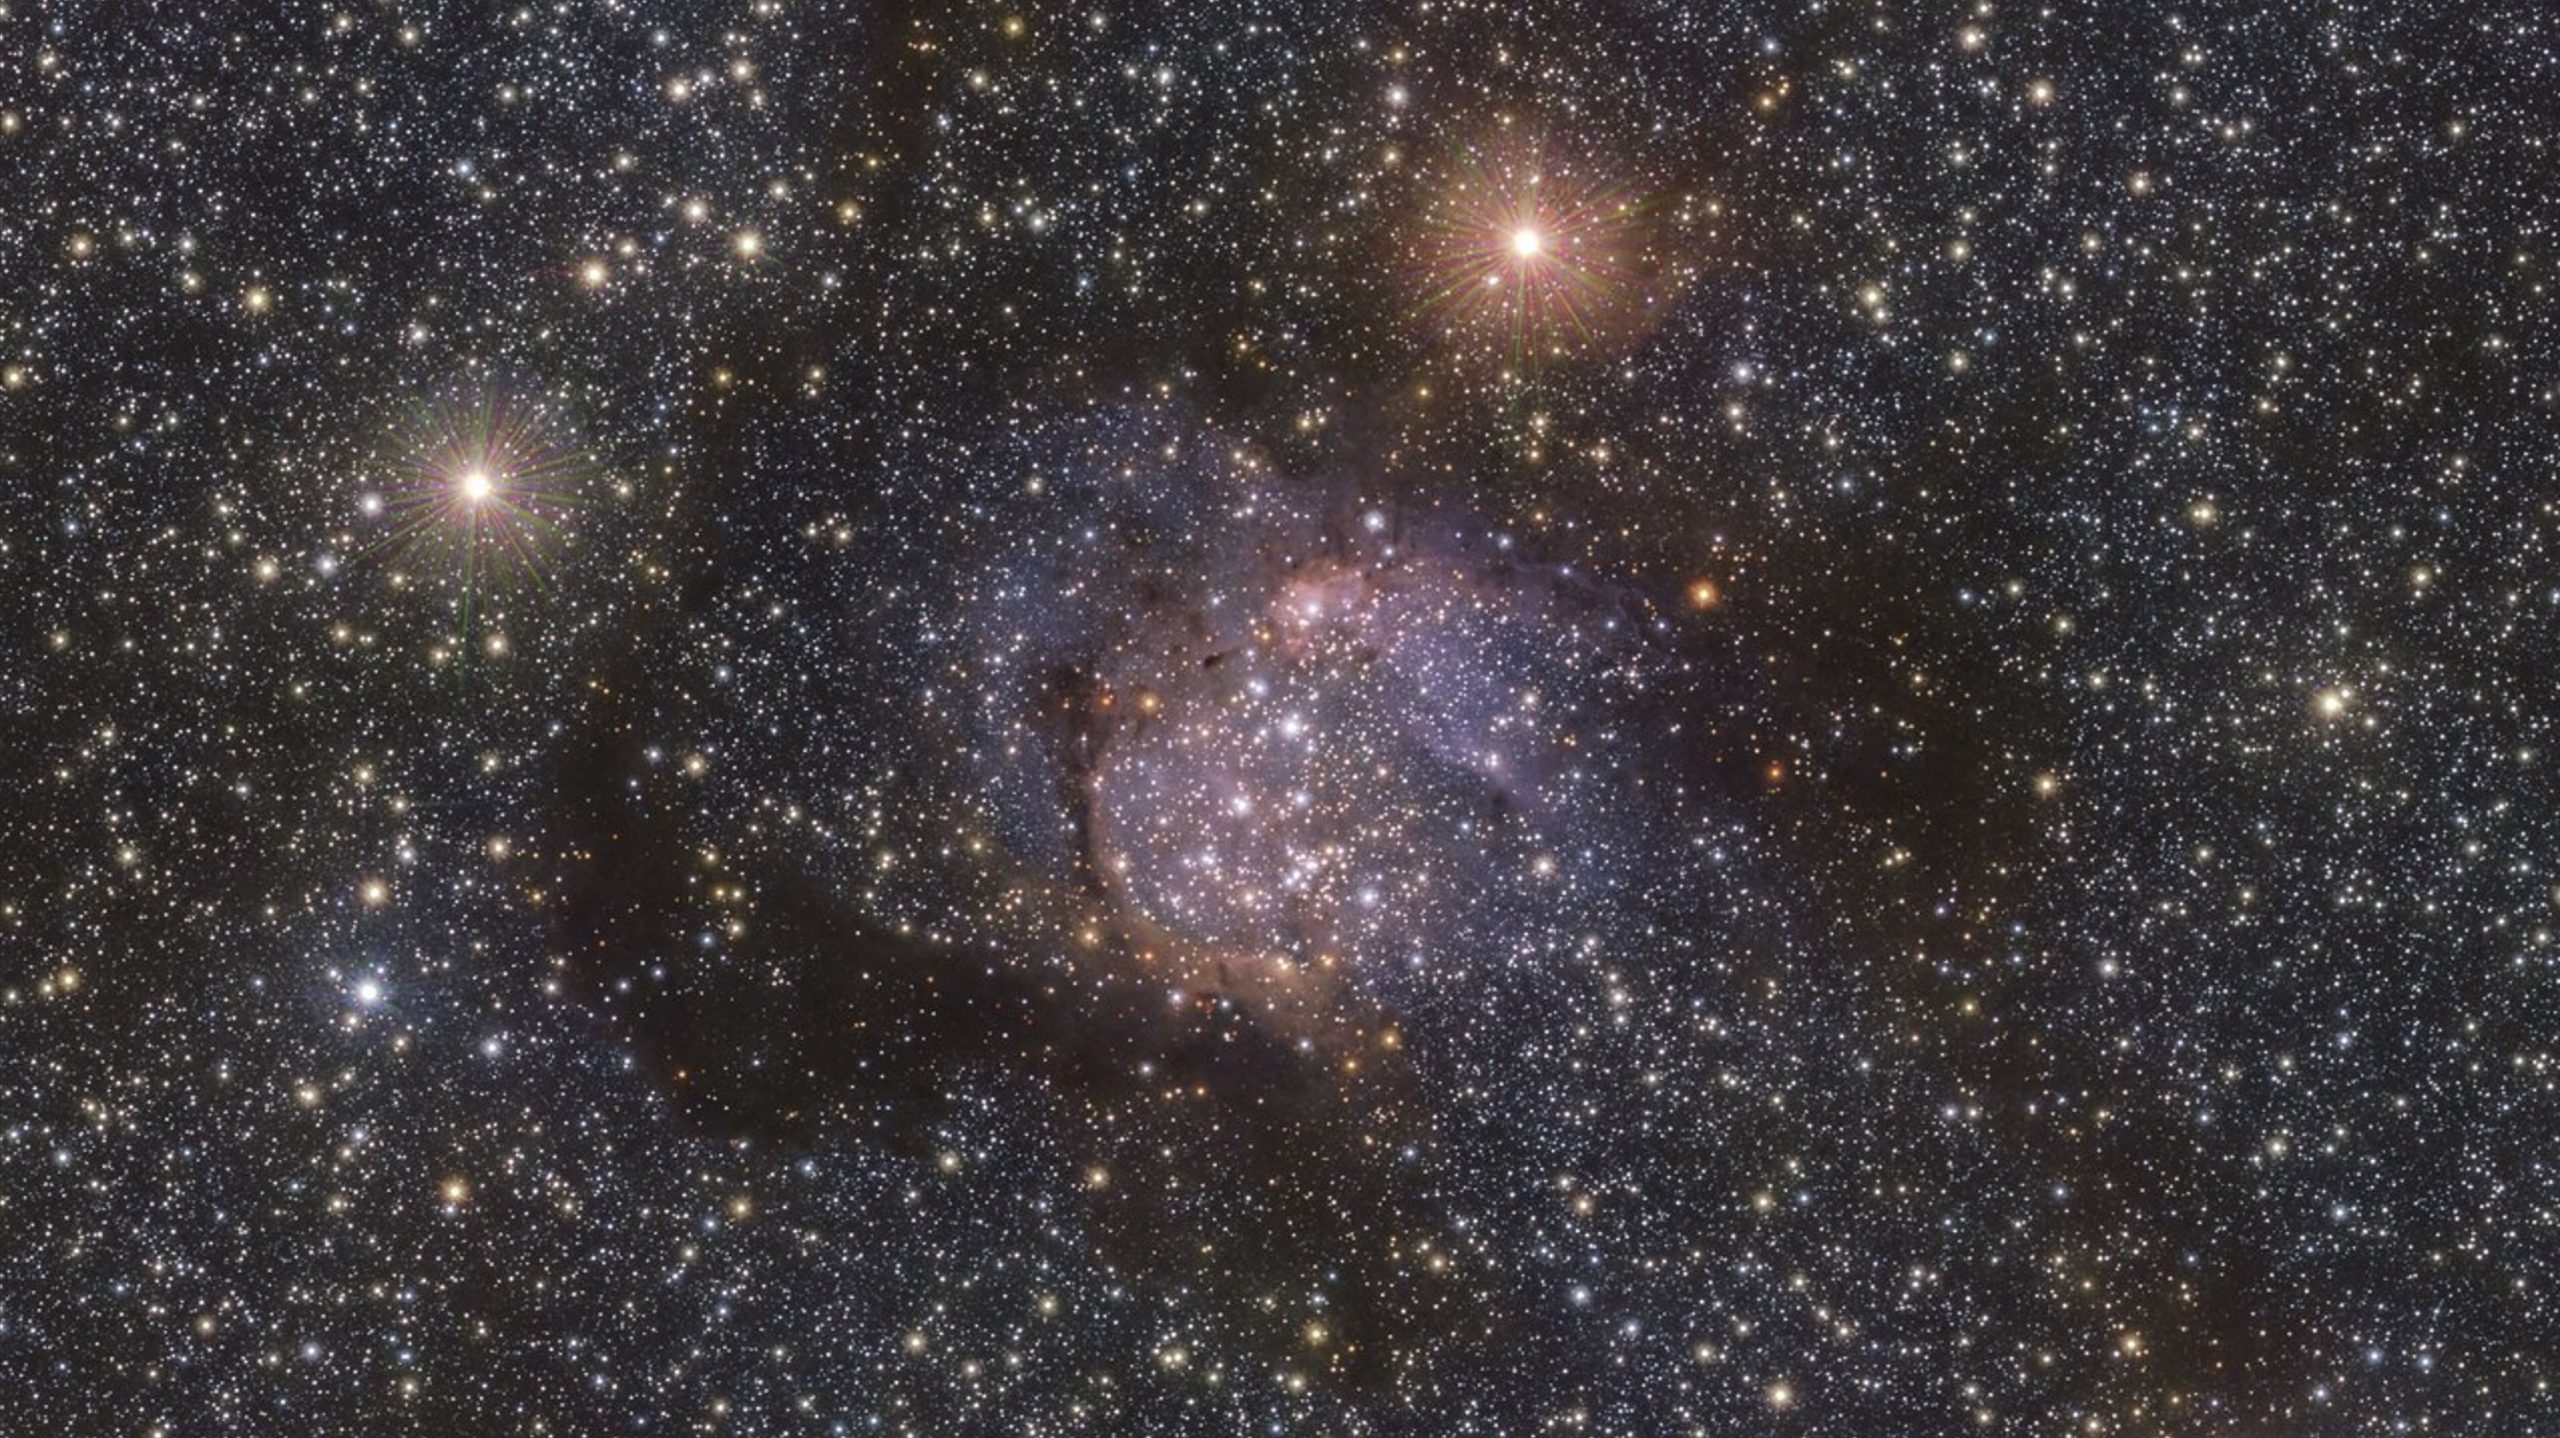 A cropped photograph of Sh2-54. Image Credit: ESO/VVVX.